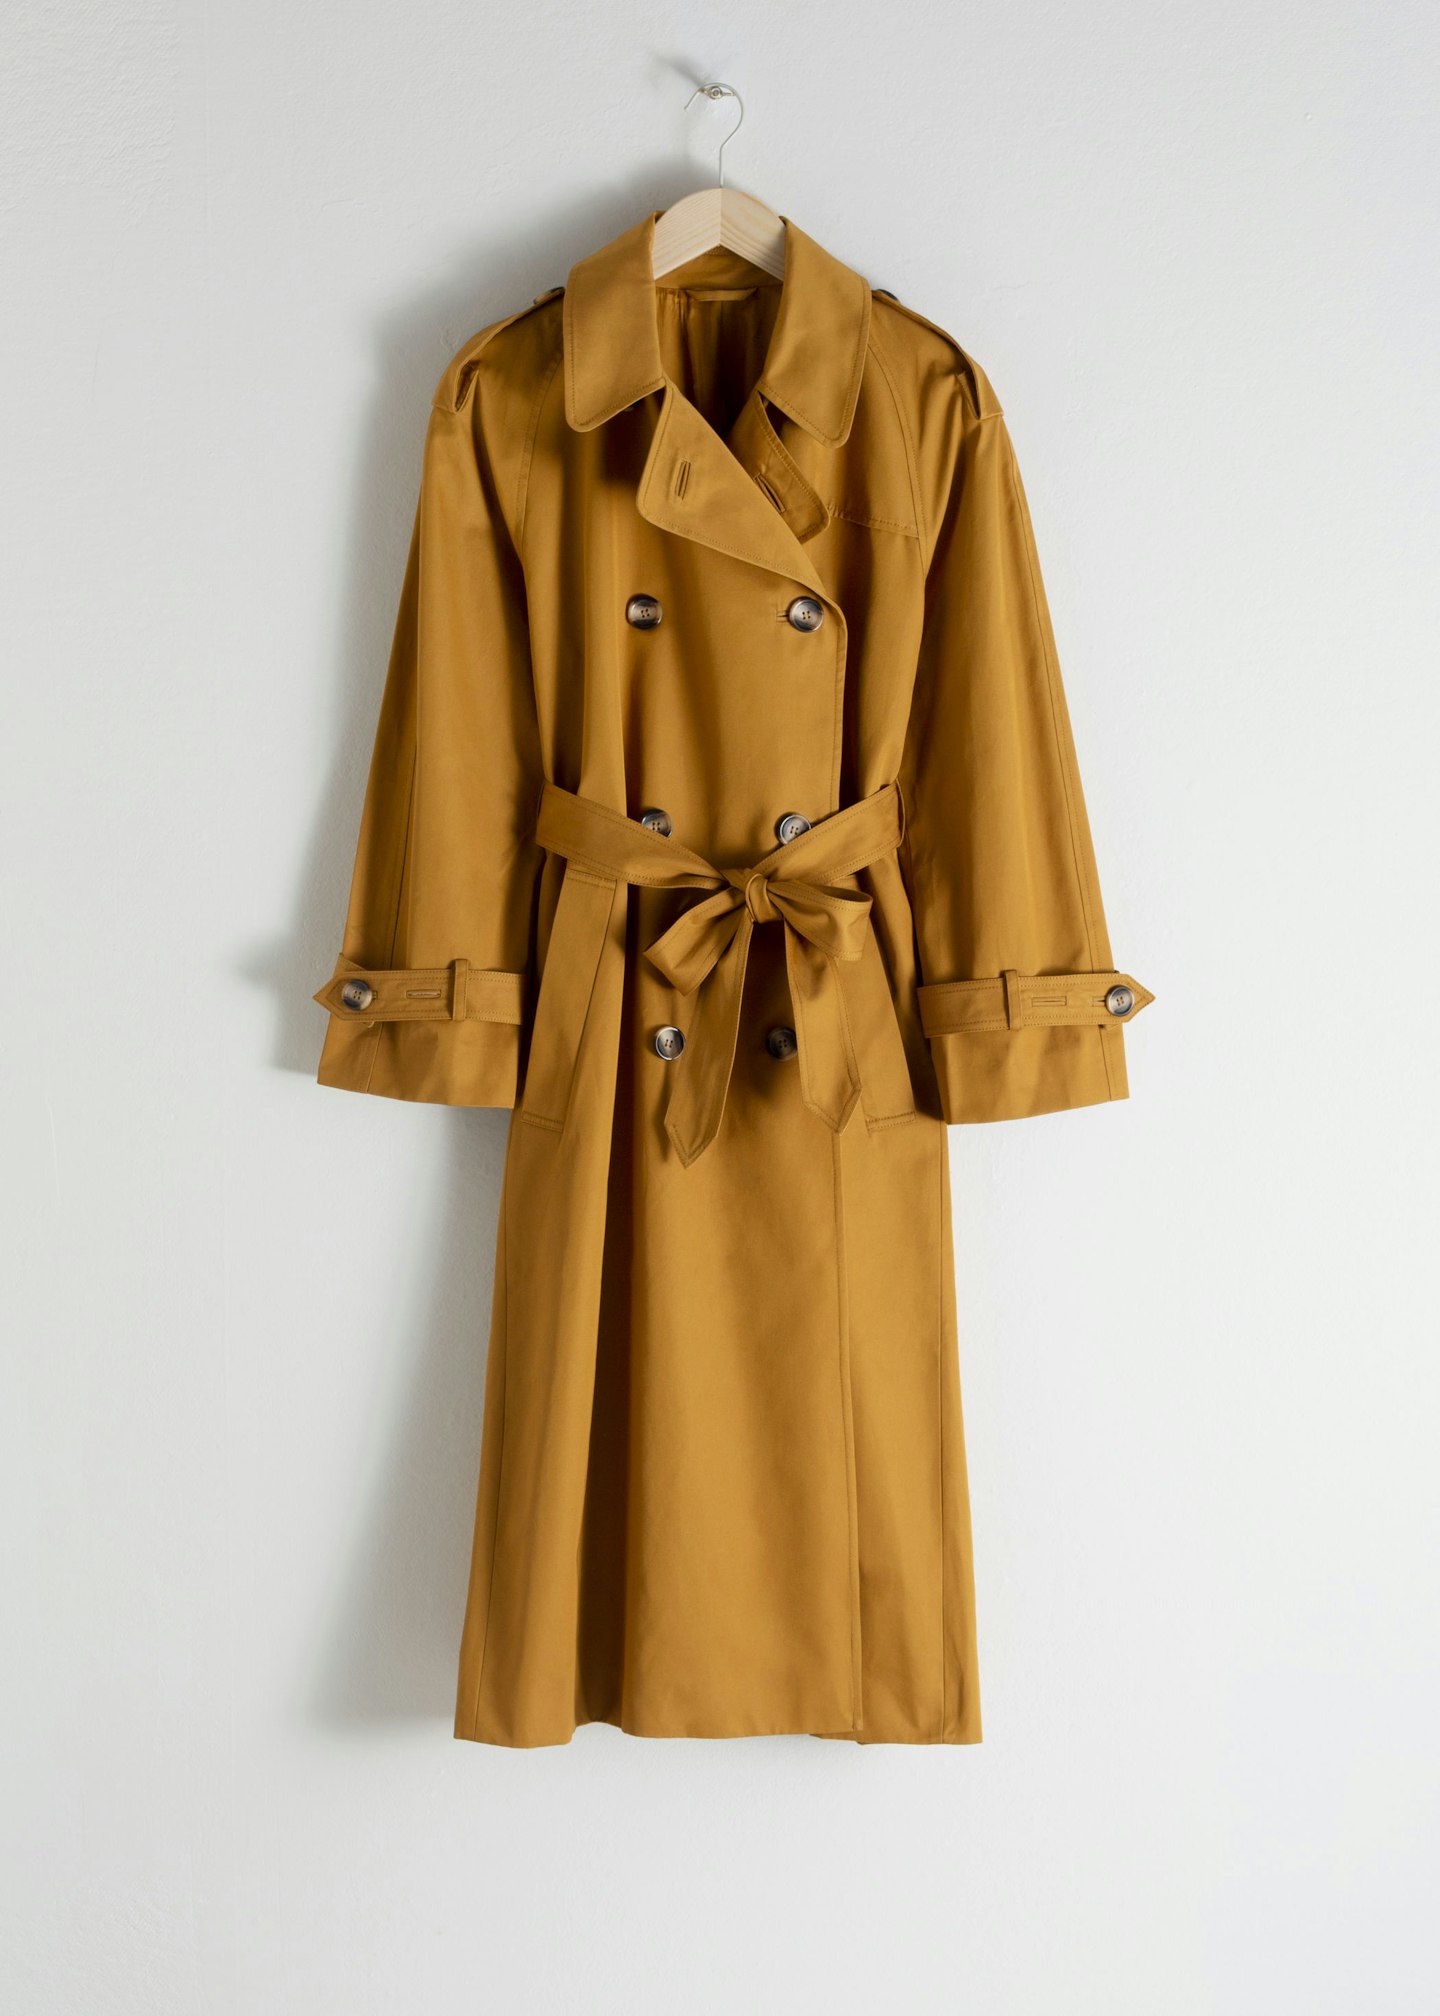 & Other Stories, Belted Trench Coat, £110